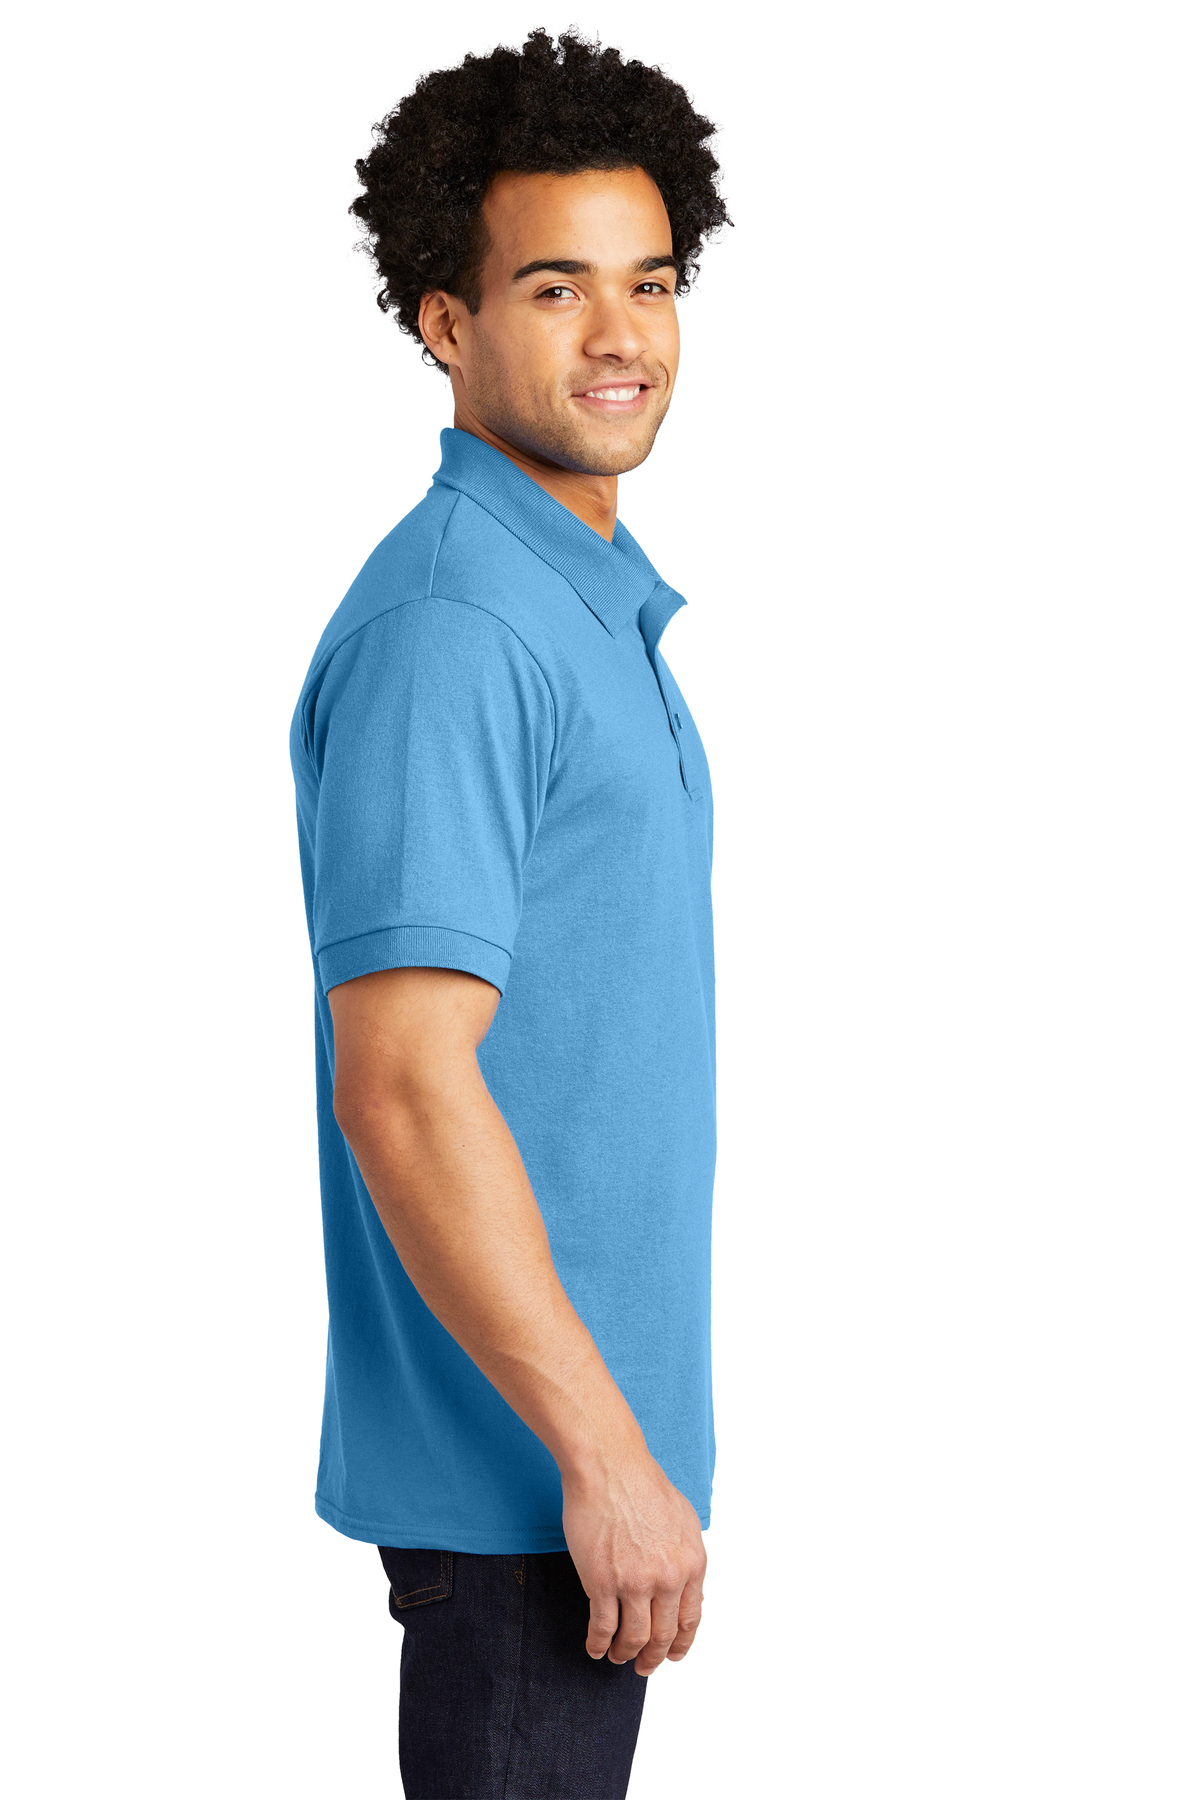 Port & Company Tall Core Blend Jersey Knit Polo   Product   Port